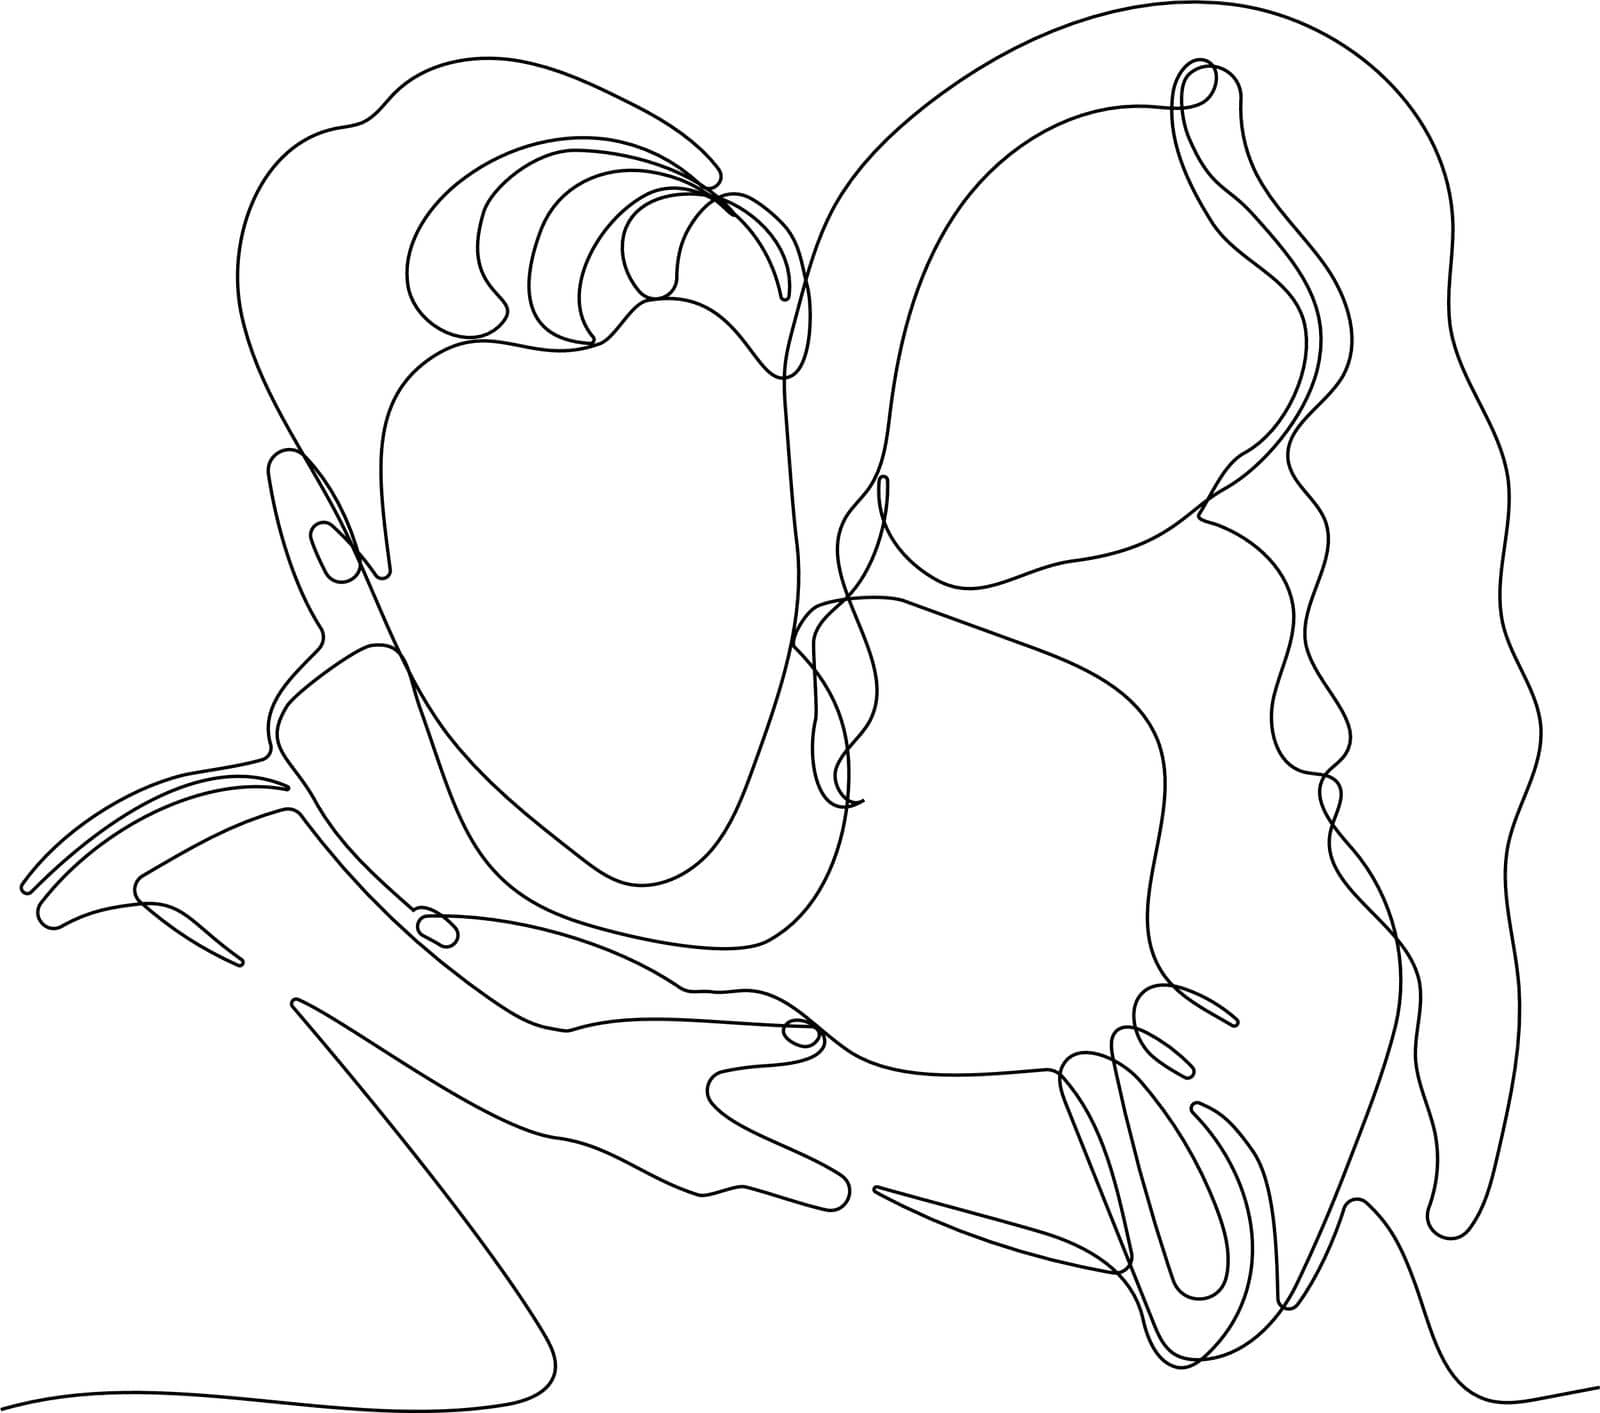 one line drawing of hugging couple vector minimalism. Single hand drawn continuous of man and woman in romantic moment. by milastokerpro